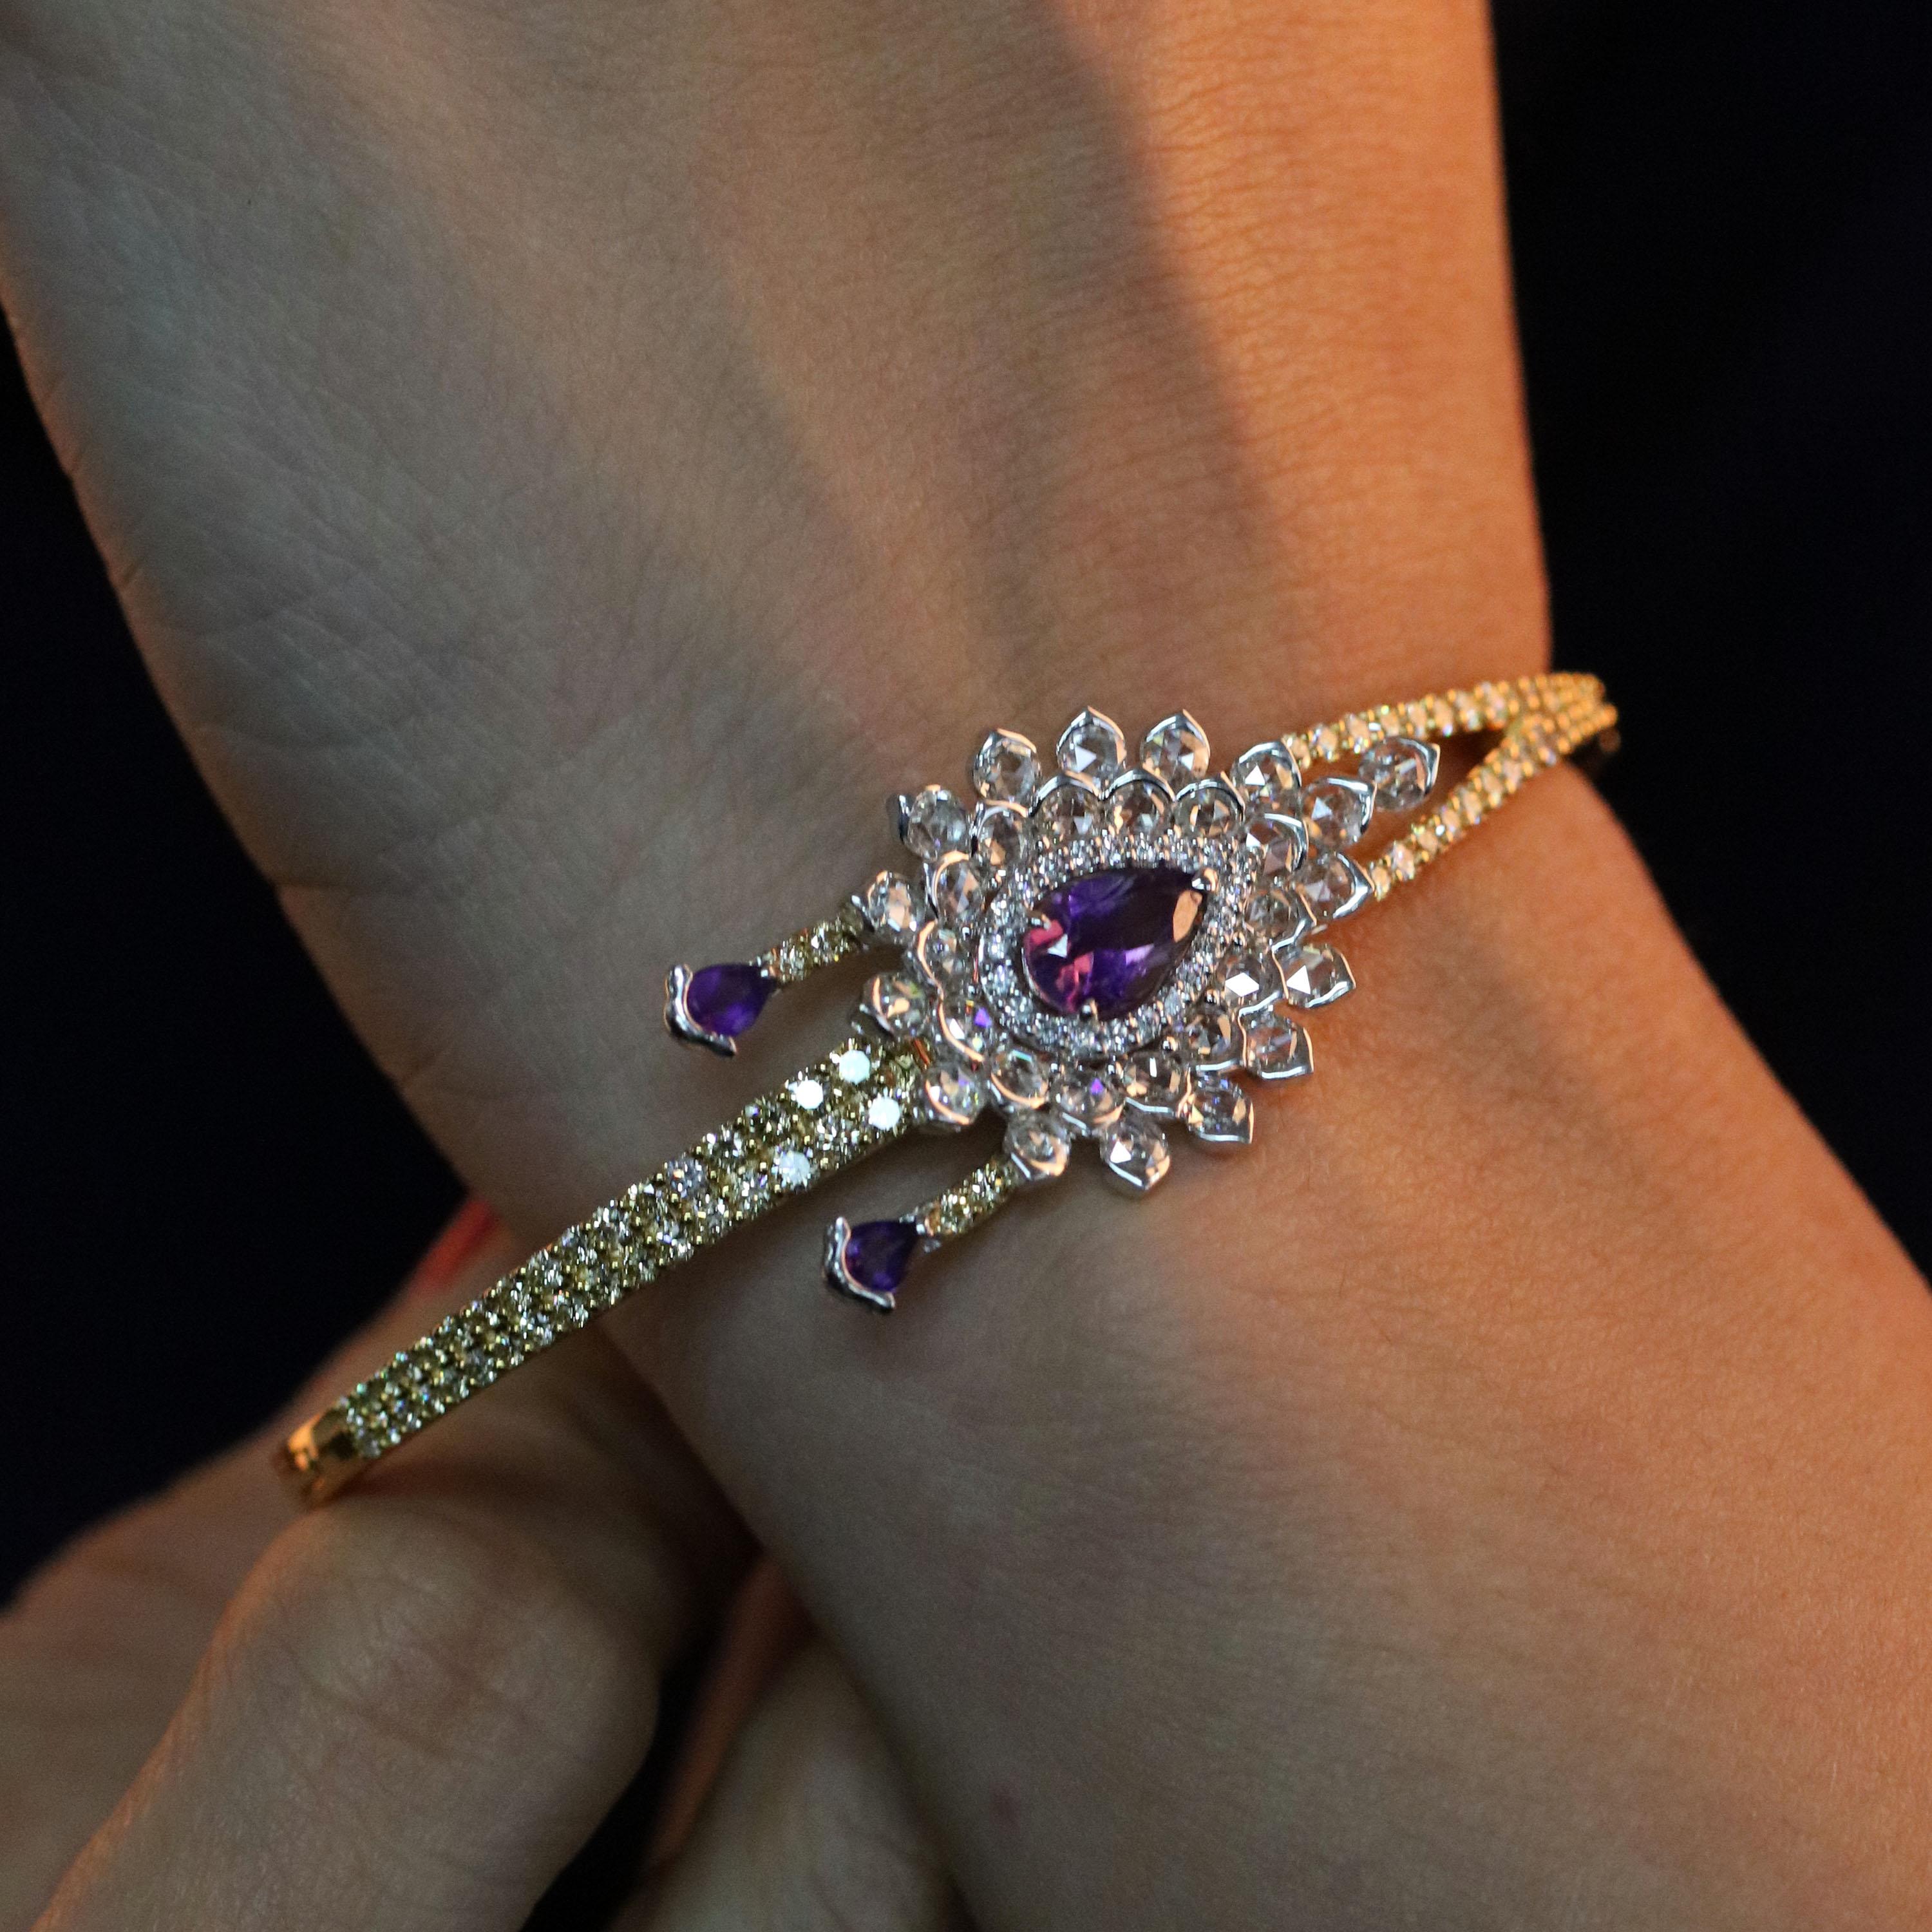 Gross Weight: 19.45 Grams
Diamond Weight: 2.89 cts
Amethyst Weight: 0.95 cts
Bracelet Size: 56.00 MM X 46.10 MM
IGI Certification can be done on Request.

Video of the product can be shared on request.

Openable Bracelet fabricated in 18 karat white